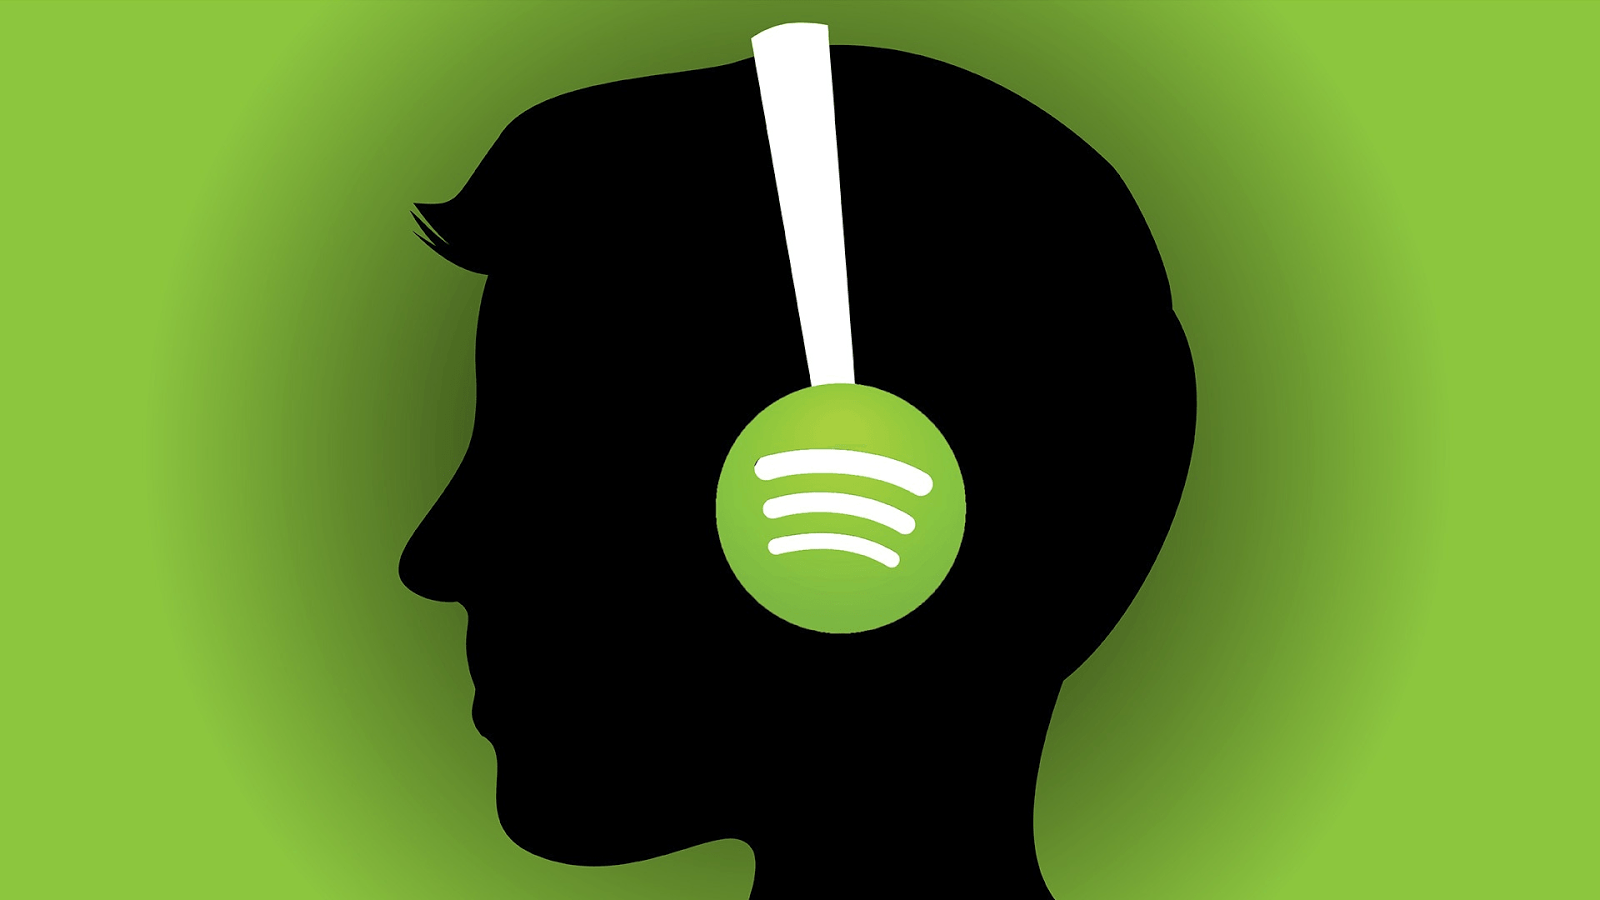 Spotify apk download for android, blackberry, iphone, windows